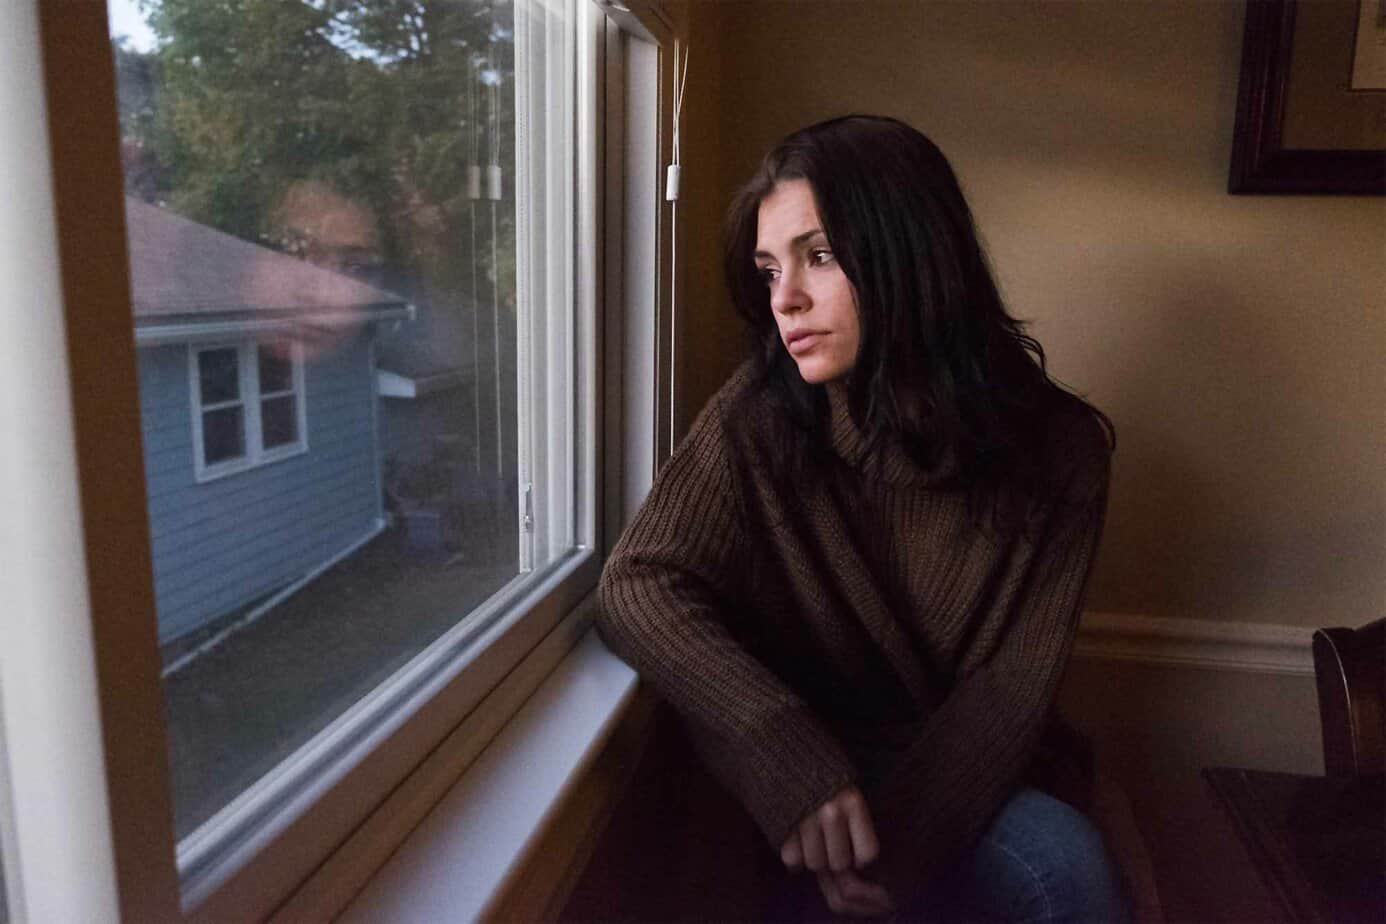 A sad woman looks out of a window